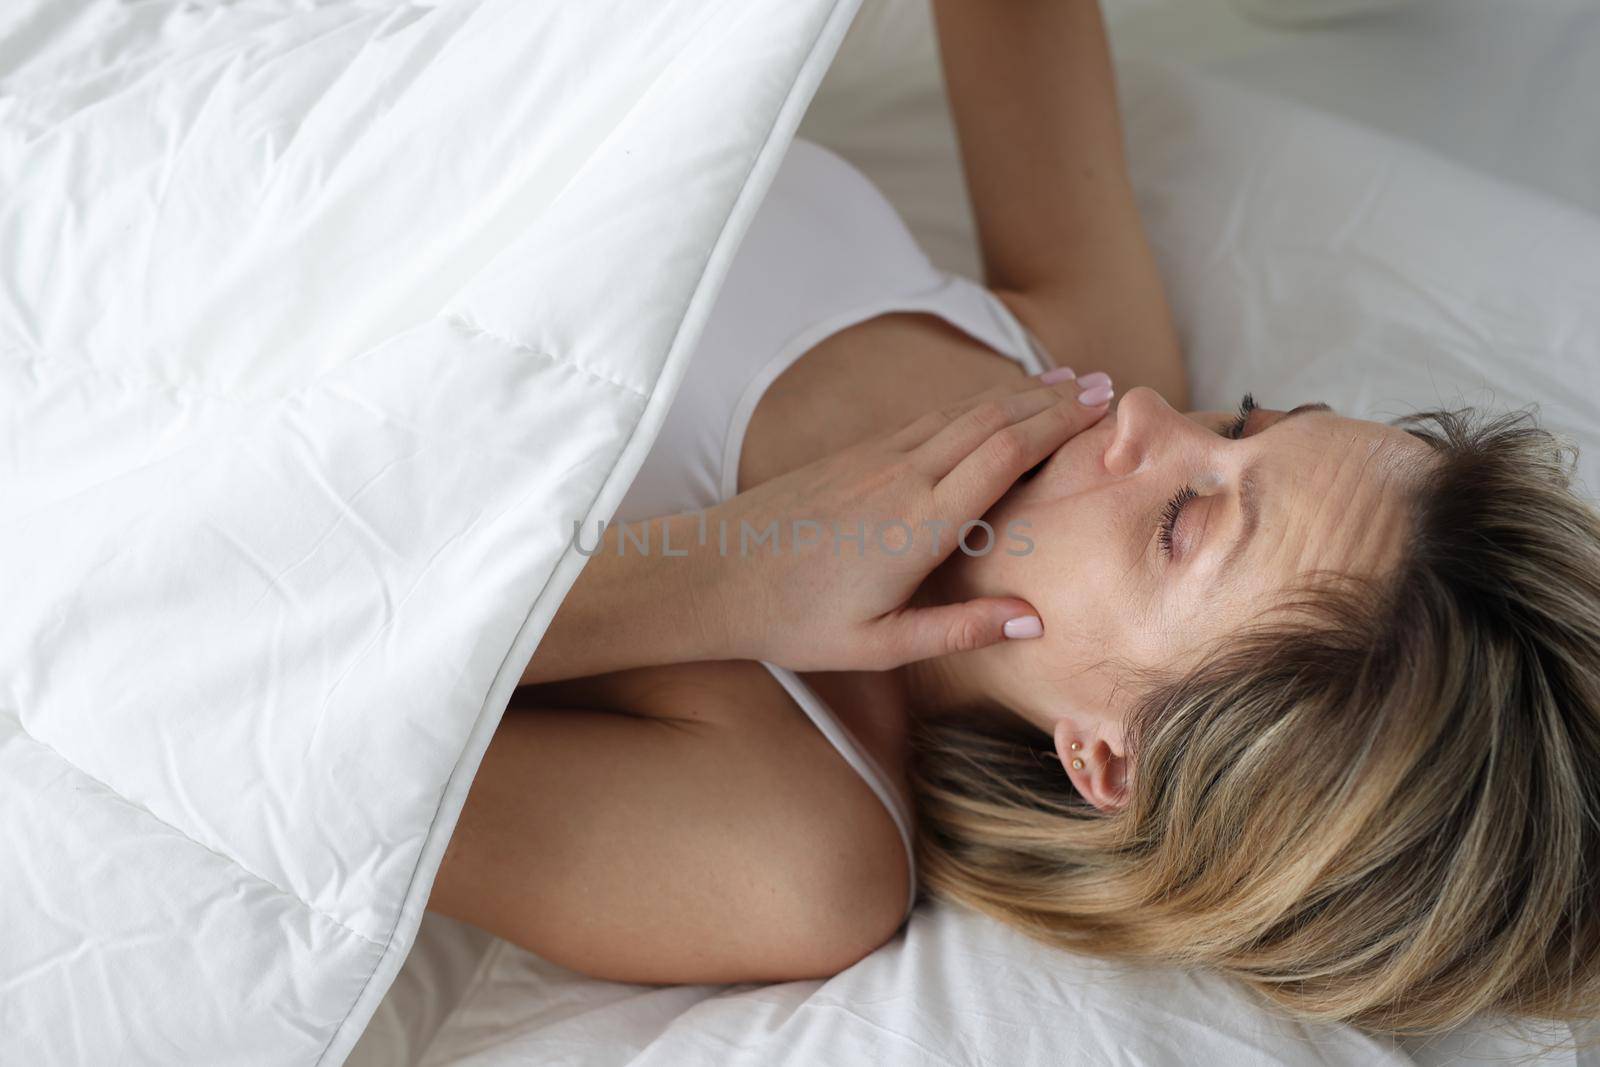 Woman looks in shock under covers in bed. Bedwetting in women concept